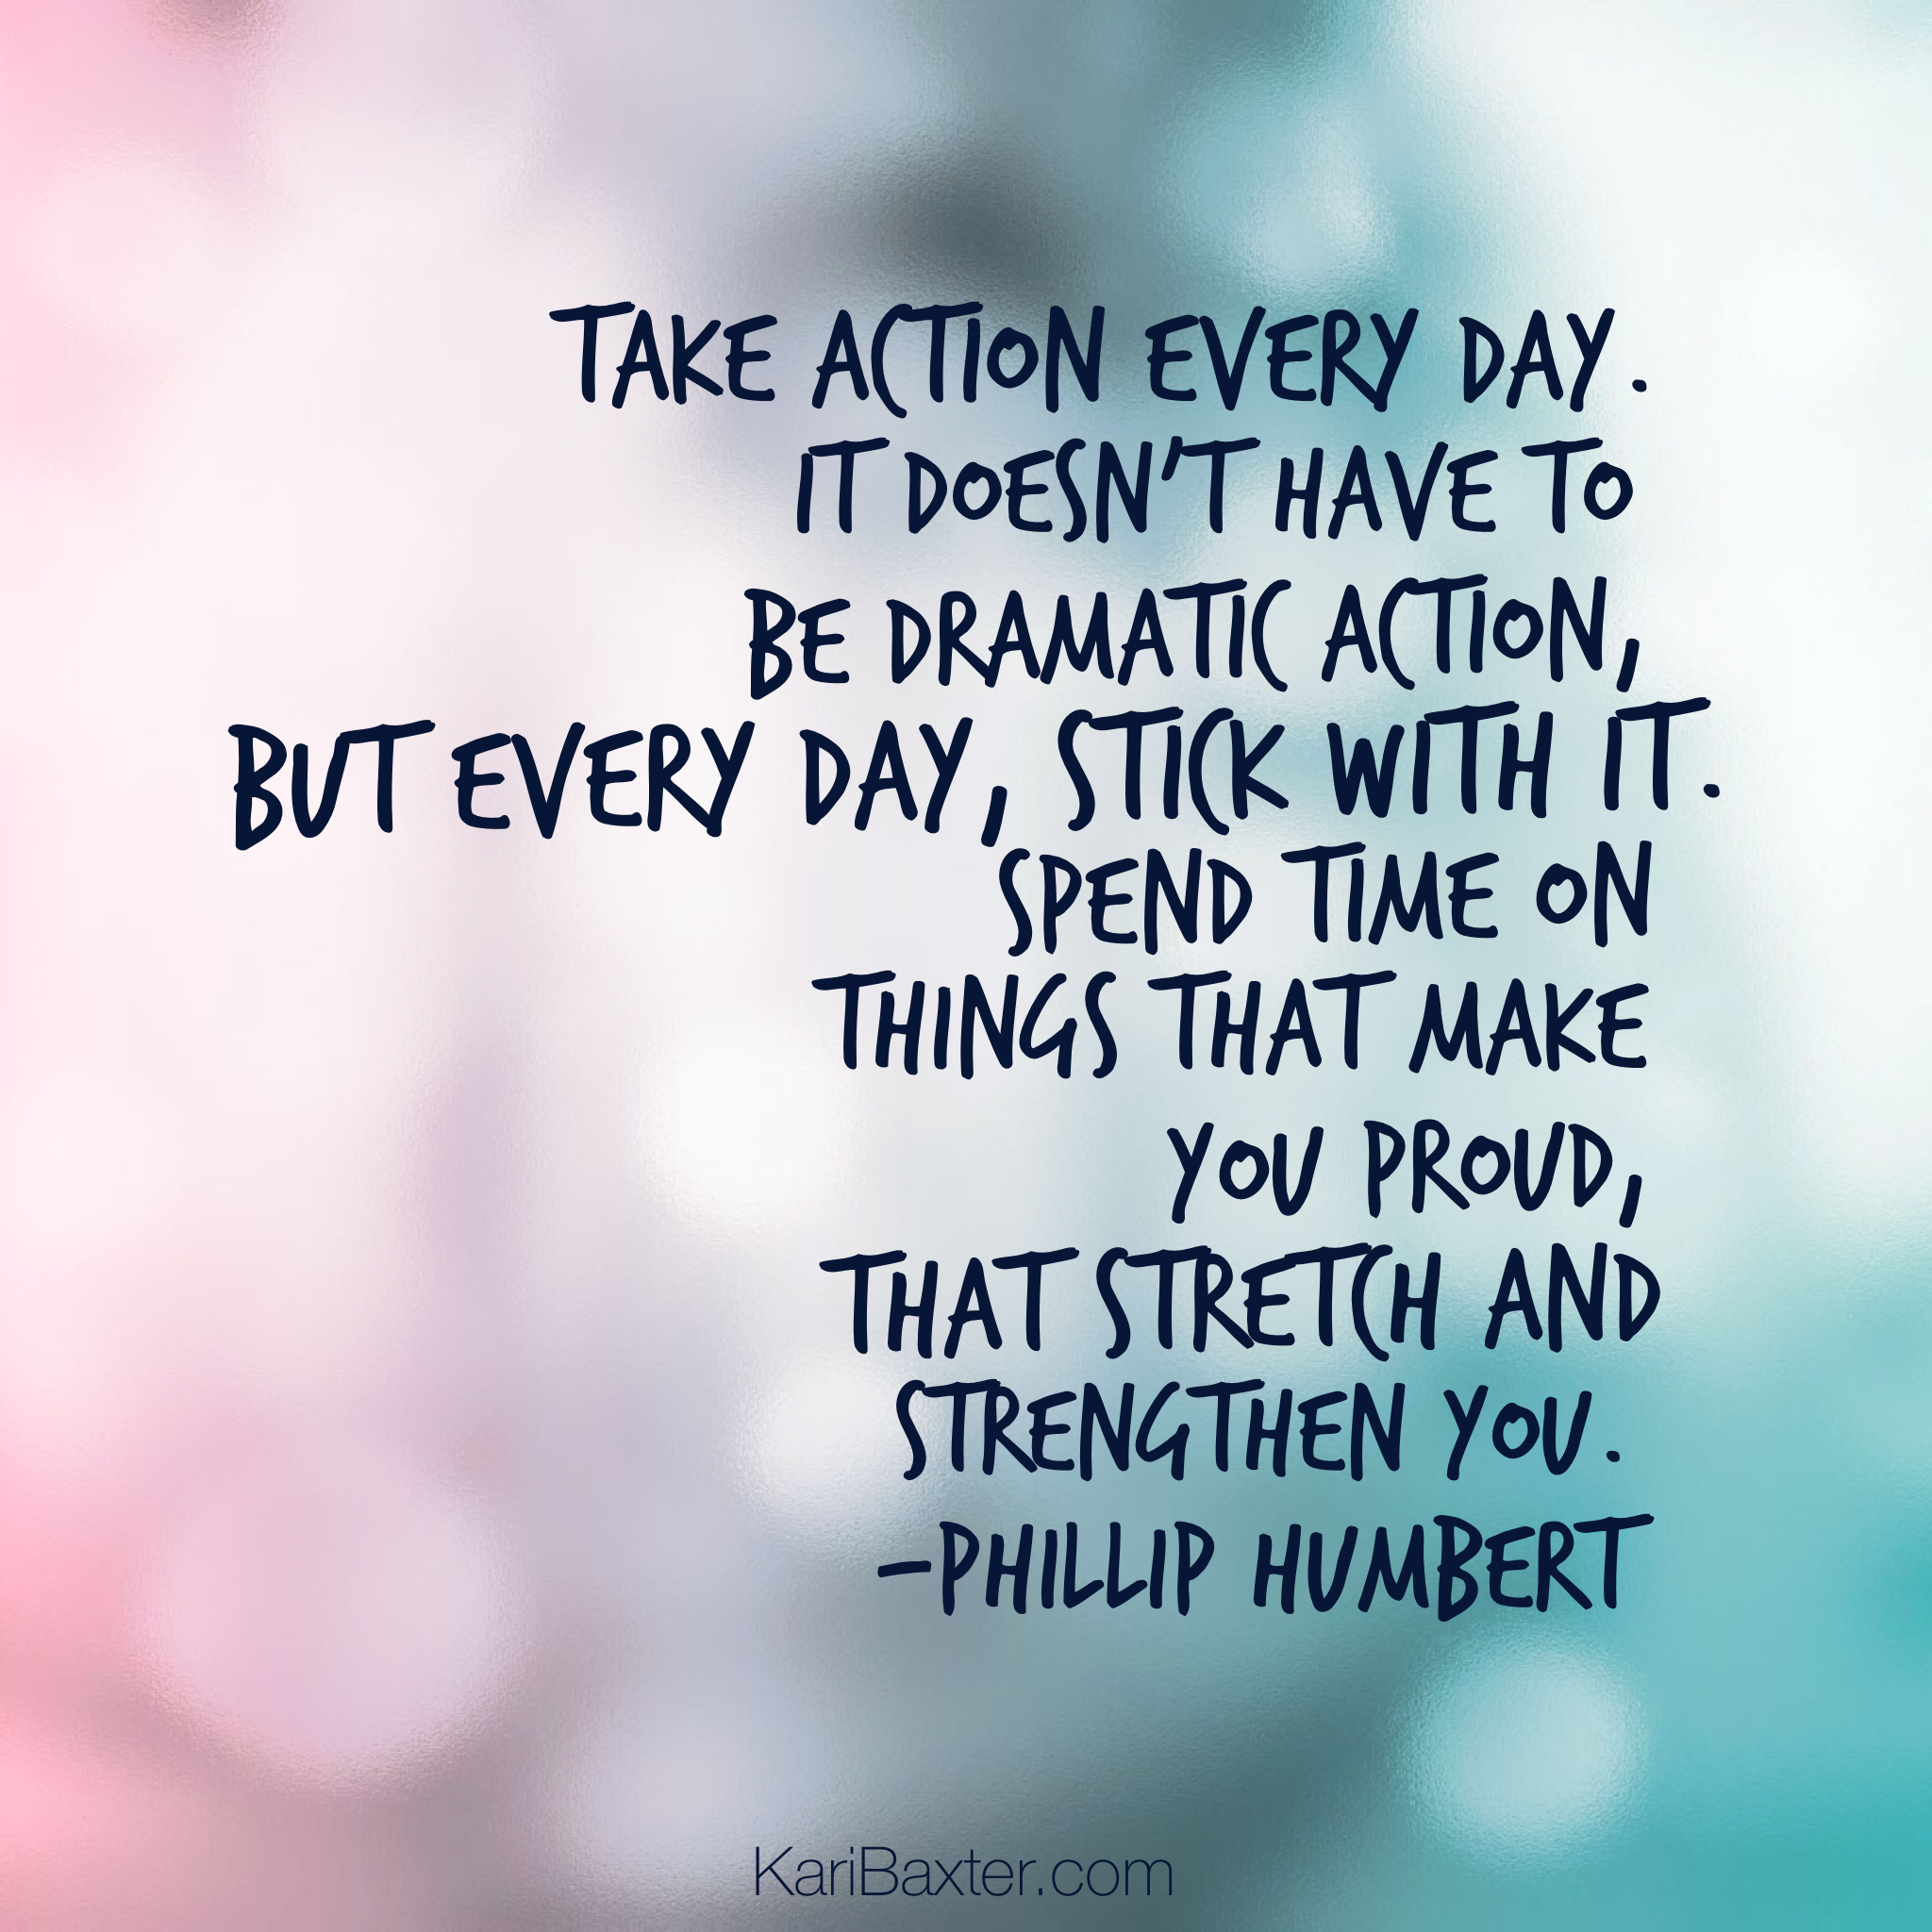 network marketing quotes take action every day